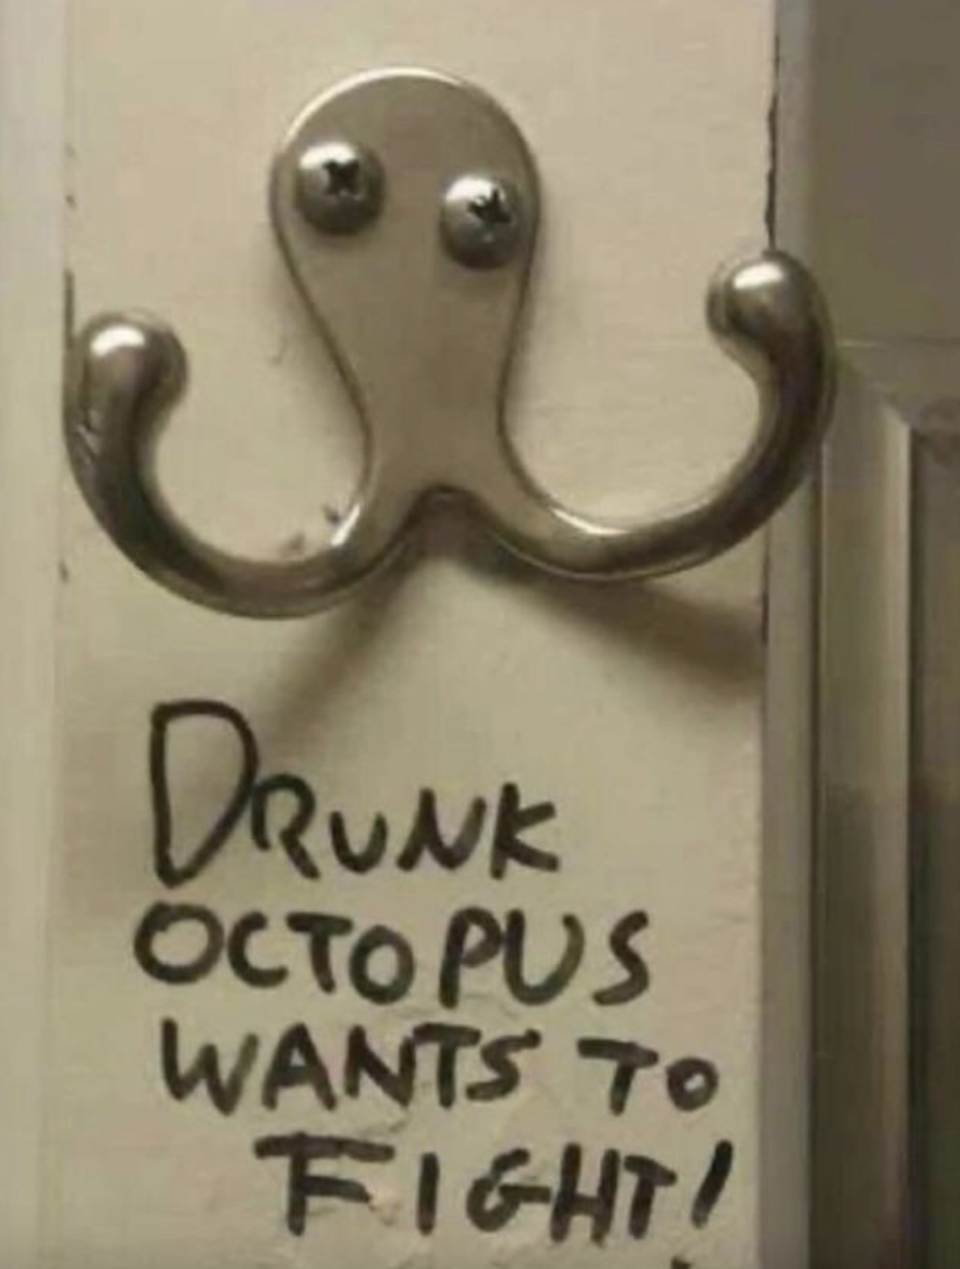 "Drunk Octopus Wants to Fight!"